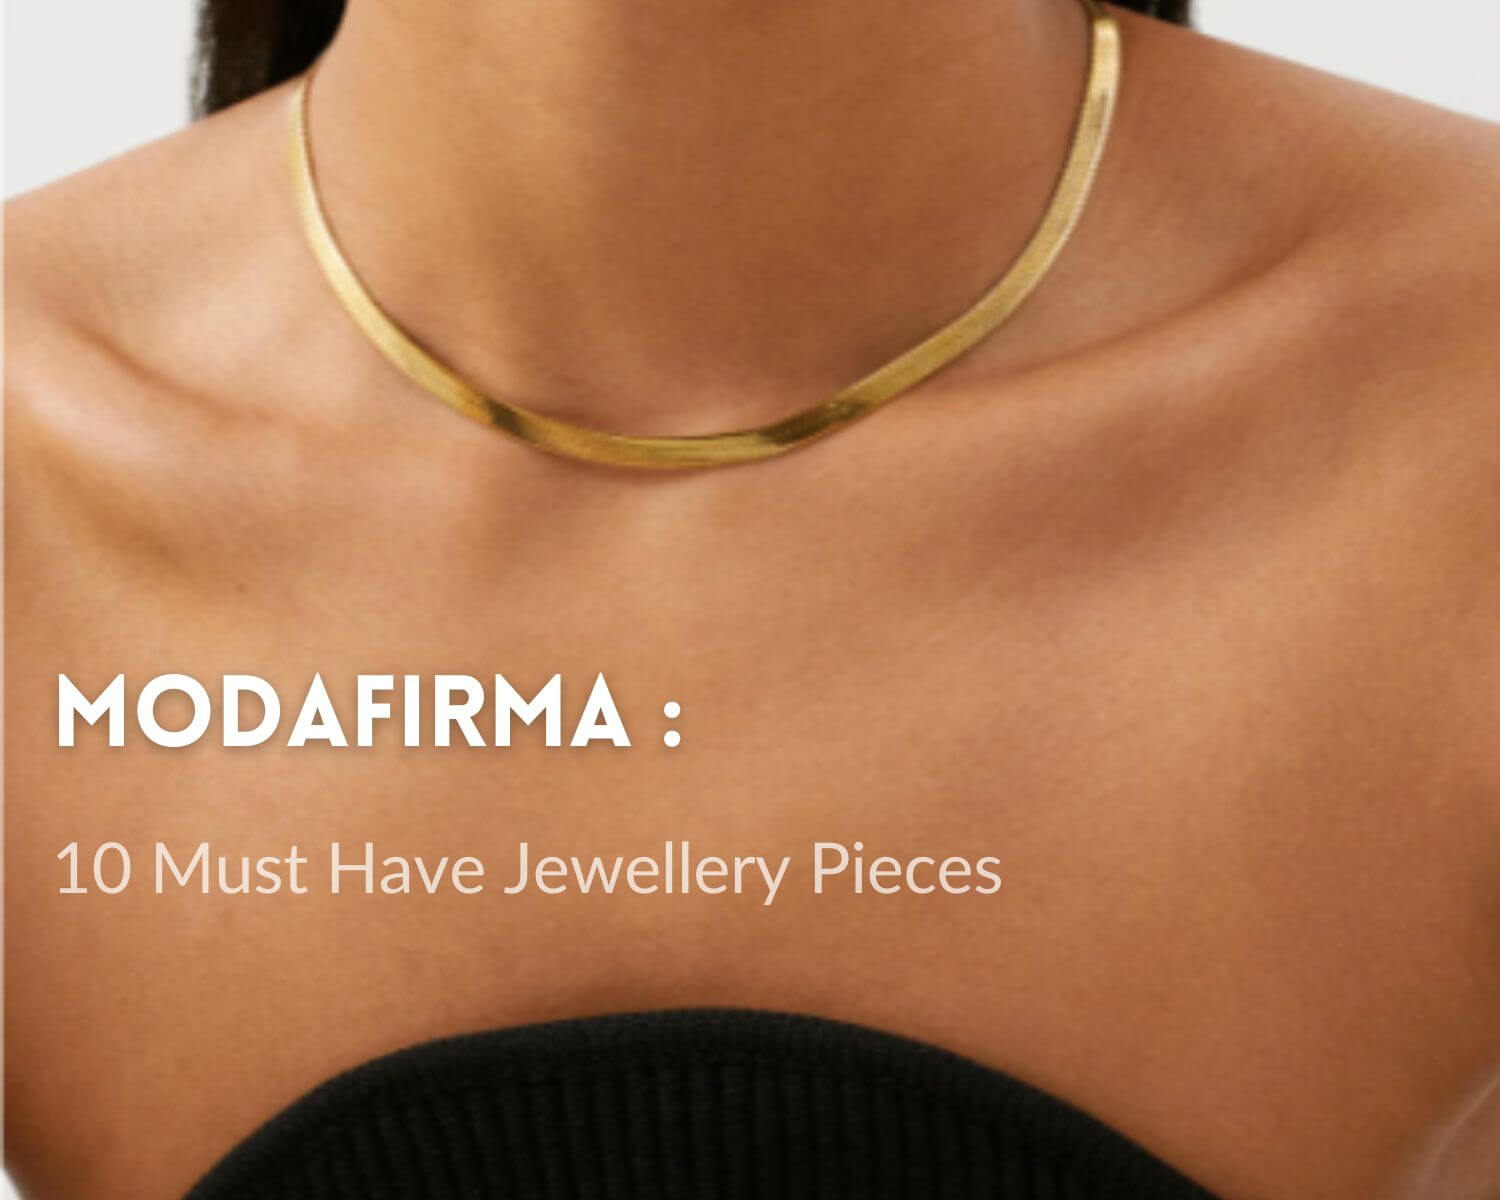 10 Must Have Jewellery Pieces